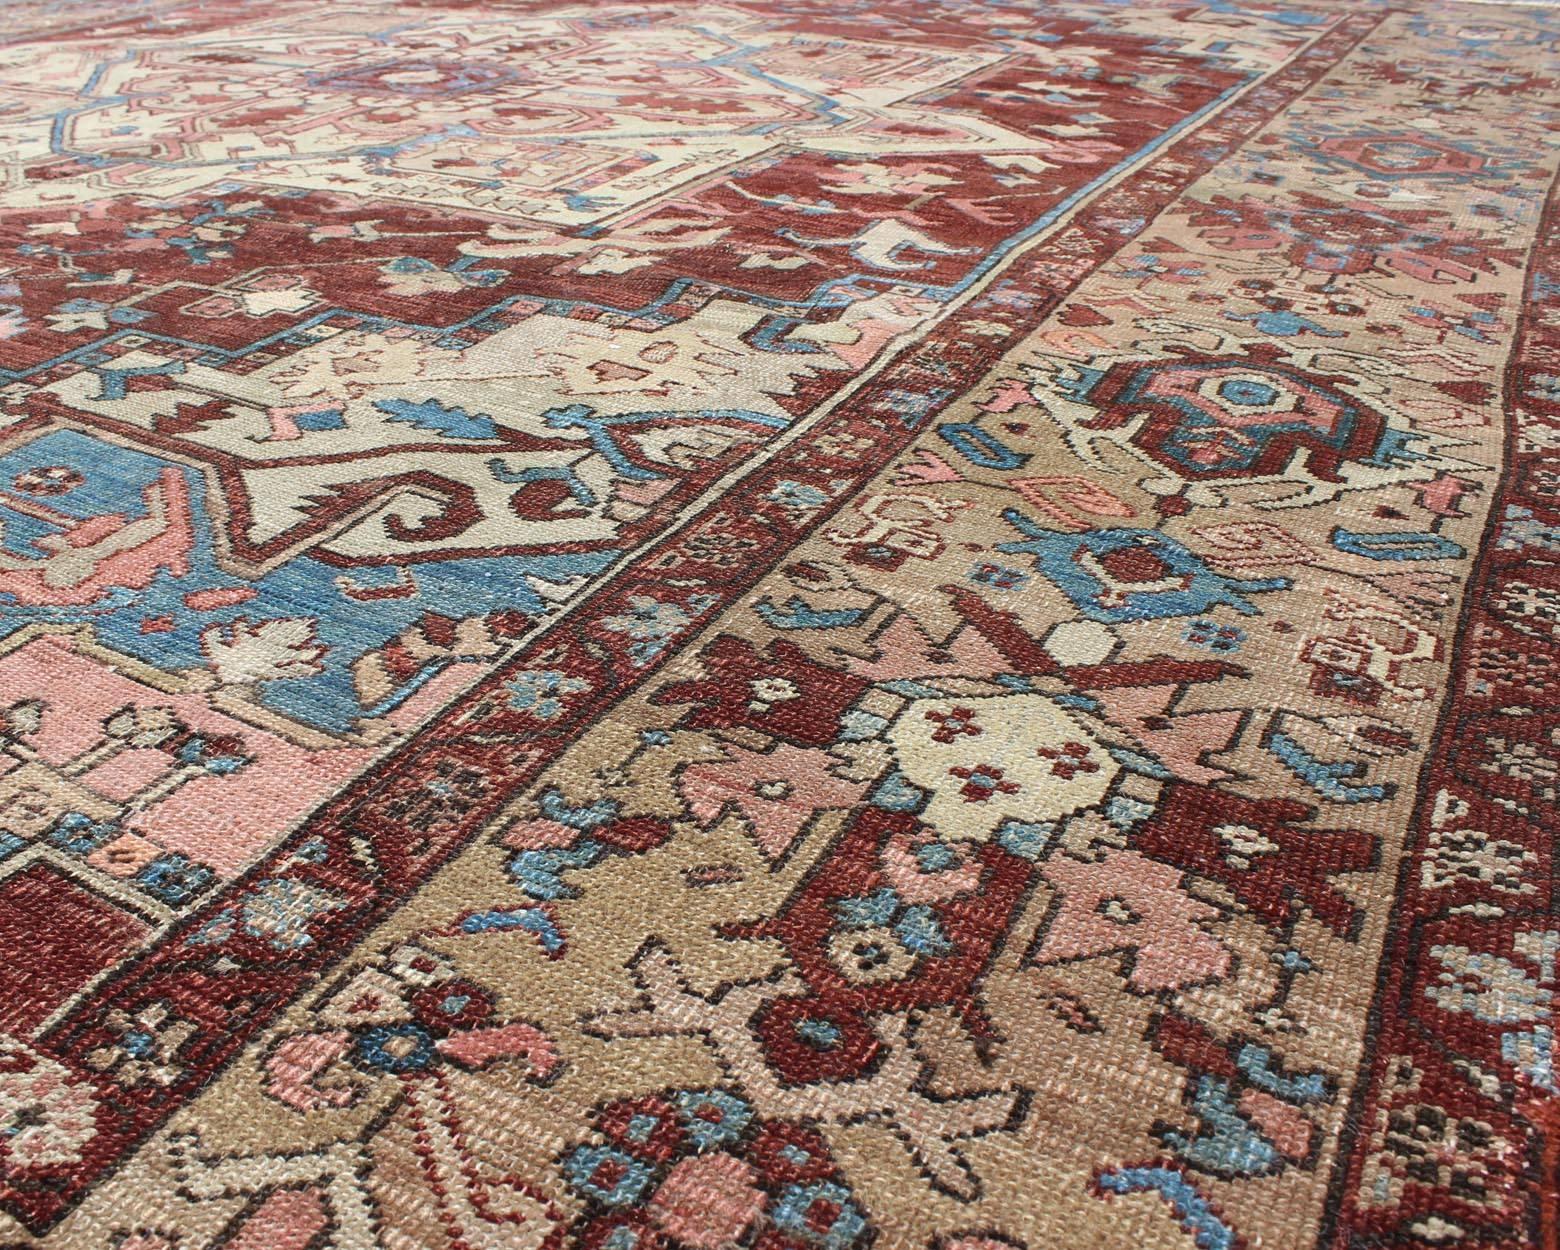 19th Century Antique Persian Serapi Carpet With Medallion In Reddish Brown Tan and Light Blue For Sale